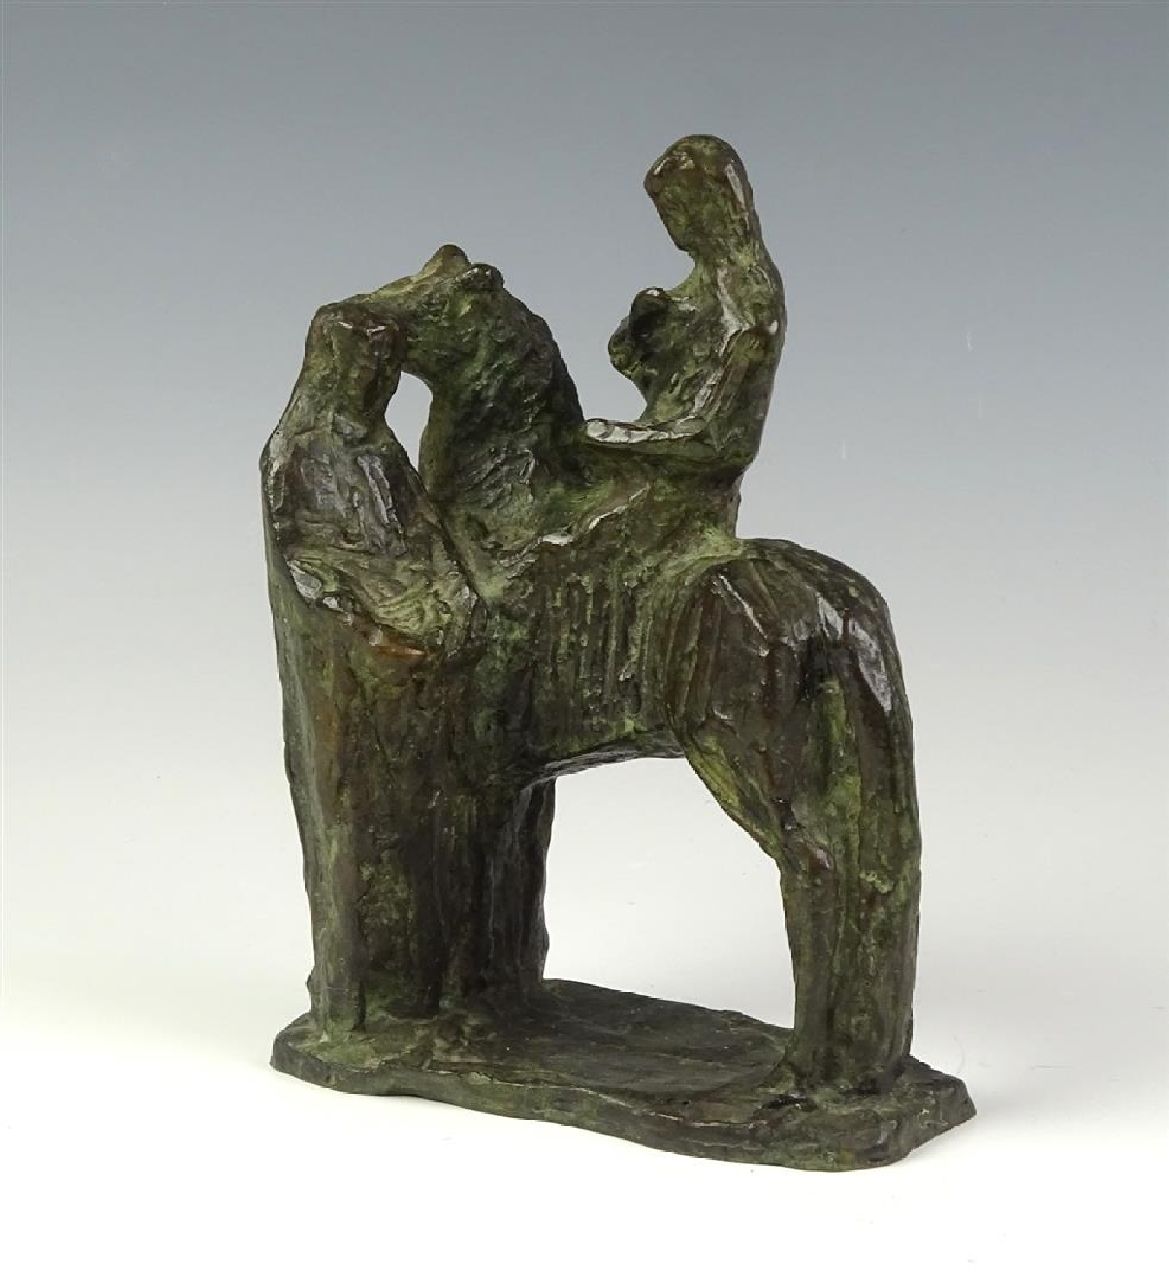 Andriessen M.S.  | Marie Silvester 'Mari' Andriessen | Sculptures and objects offered for sale | Elizabeth of Hungary, bronze 18.7 x 14.5 cm, executed ca. 1970-1972